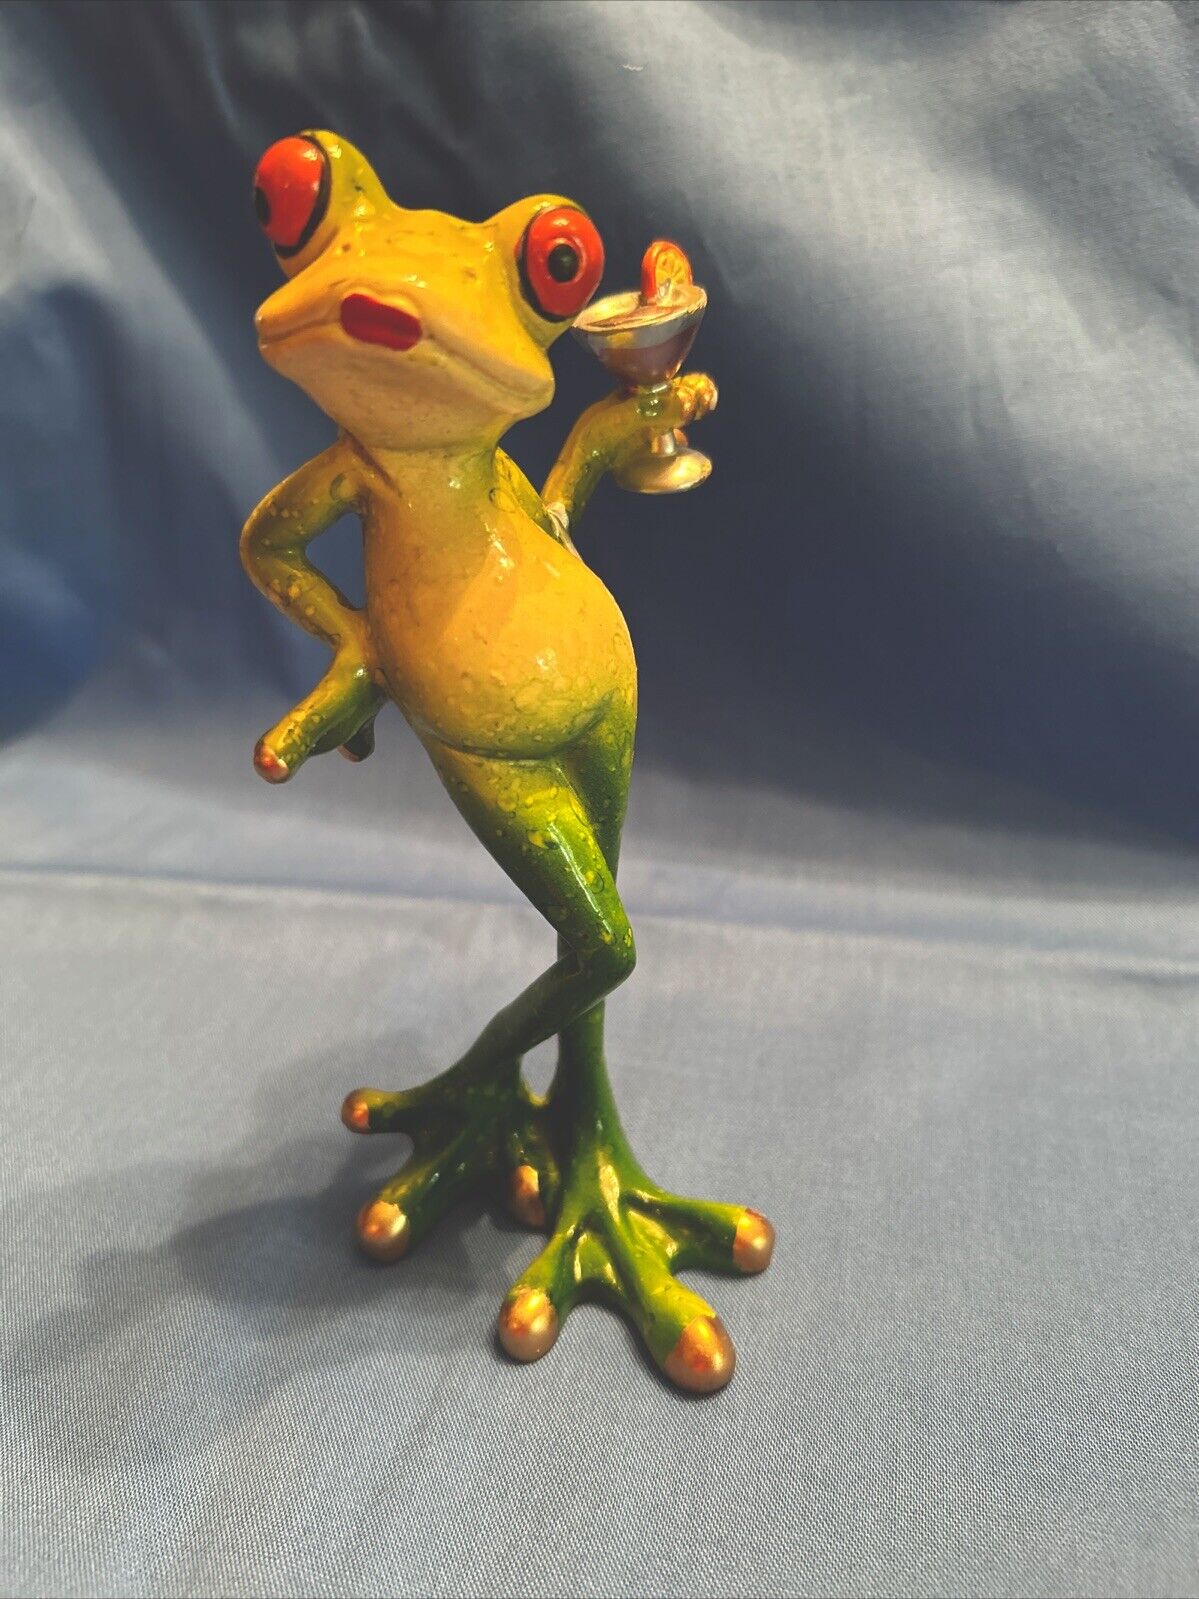 Lady Frog figurine Holding A Cocktail  ready for party time